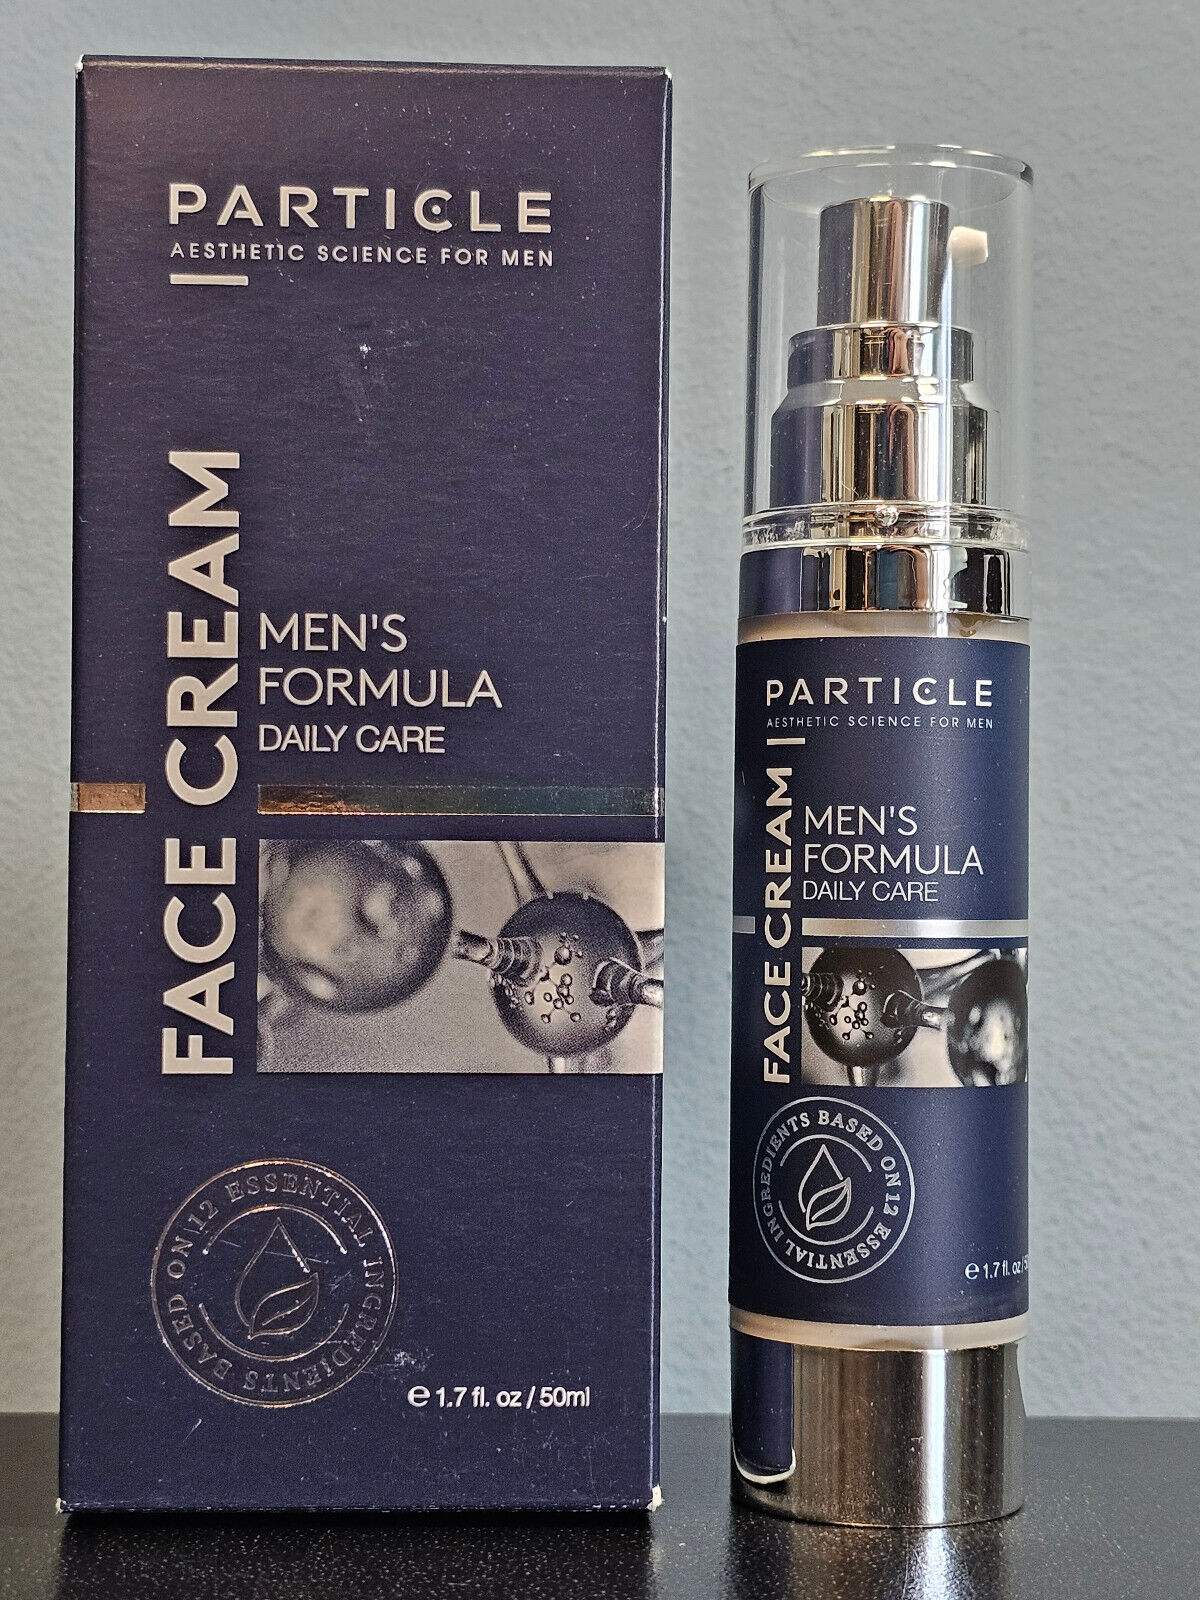 Particle for Men Face Cream Men's Formula Daily Care 1.7 oz / 50 mL - New in Box